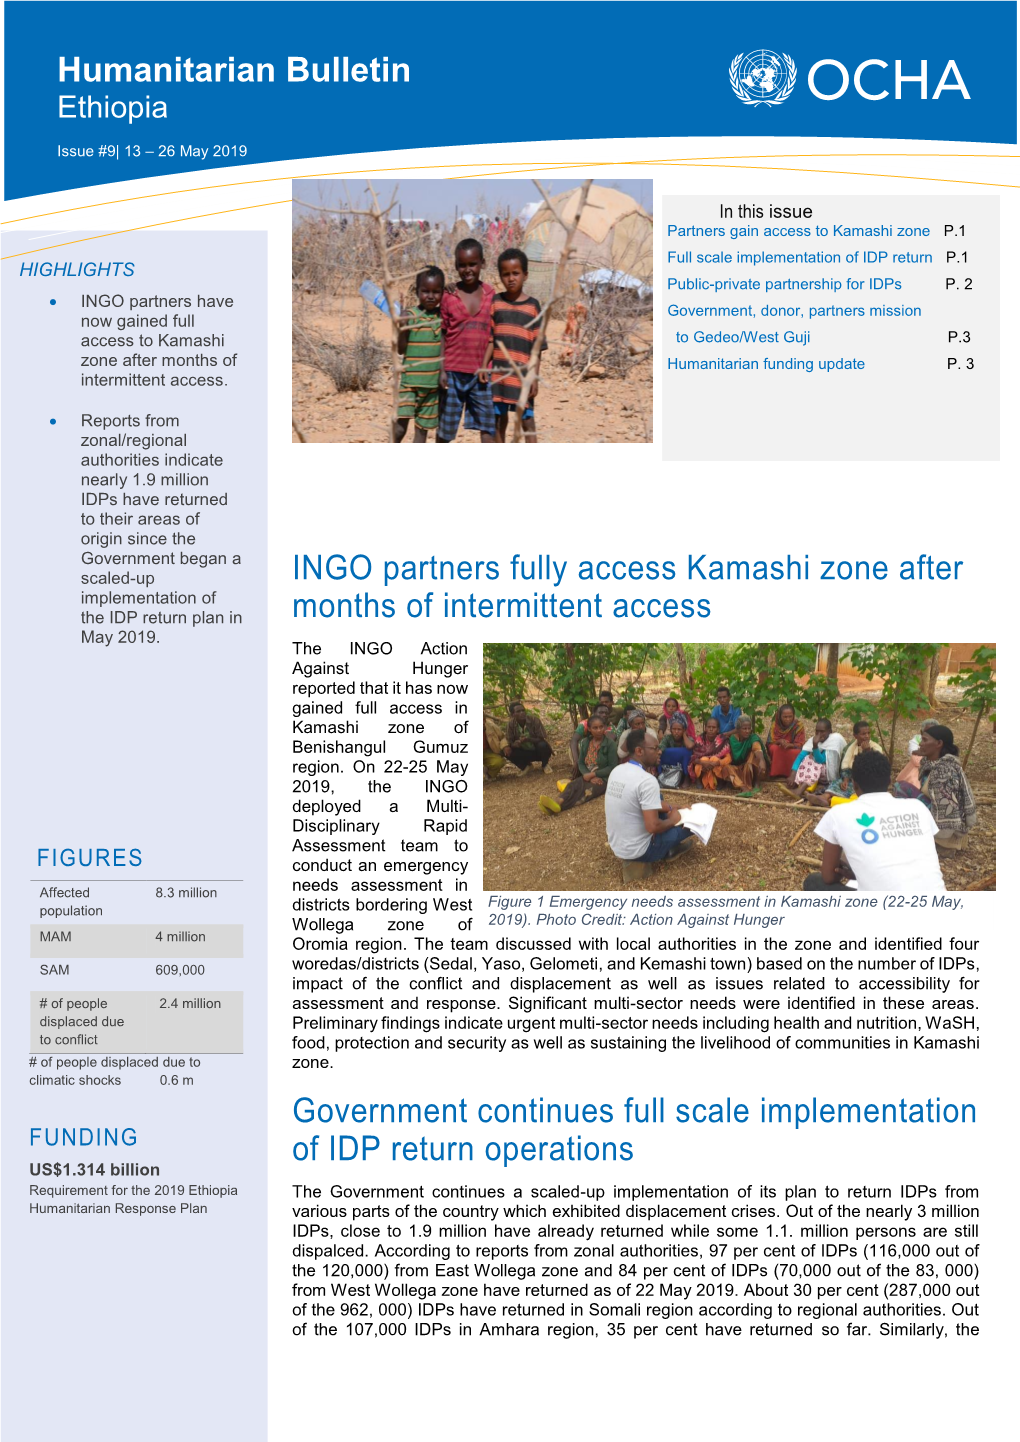 INGO Partners Fully Access Kamashi Zone After Months of Intermittent Access Government Continues Full Scale Implementation of ID